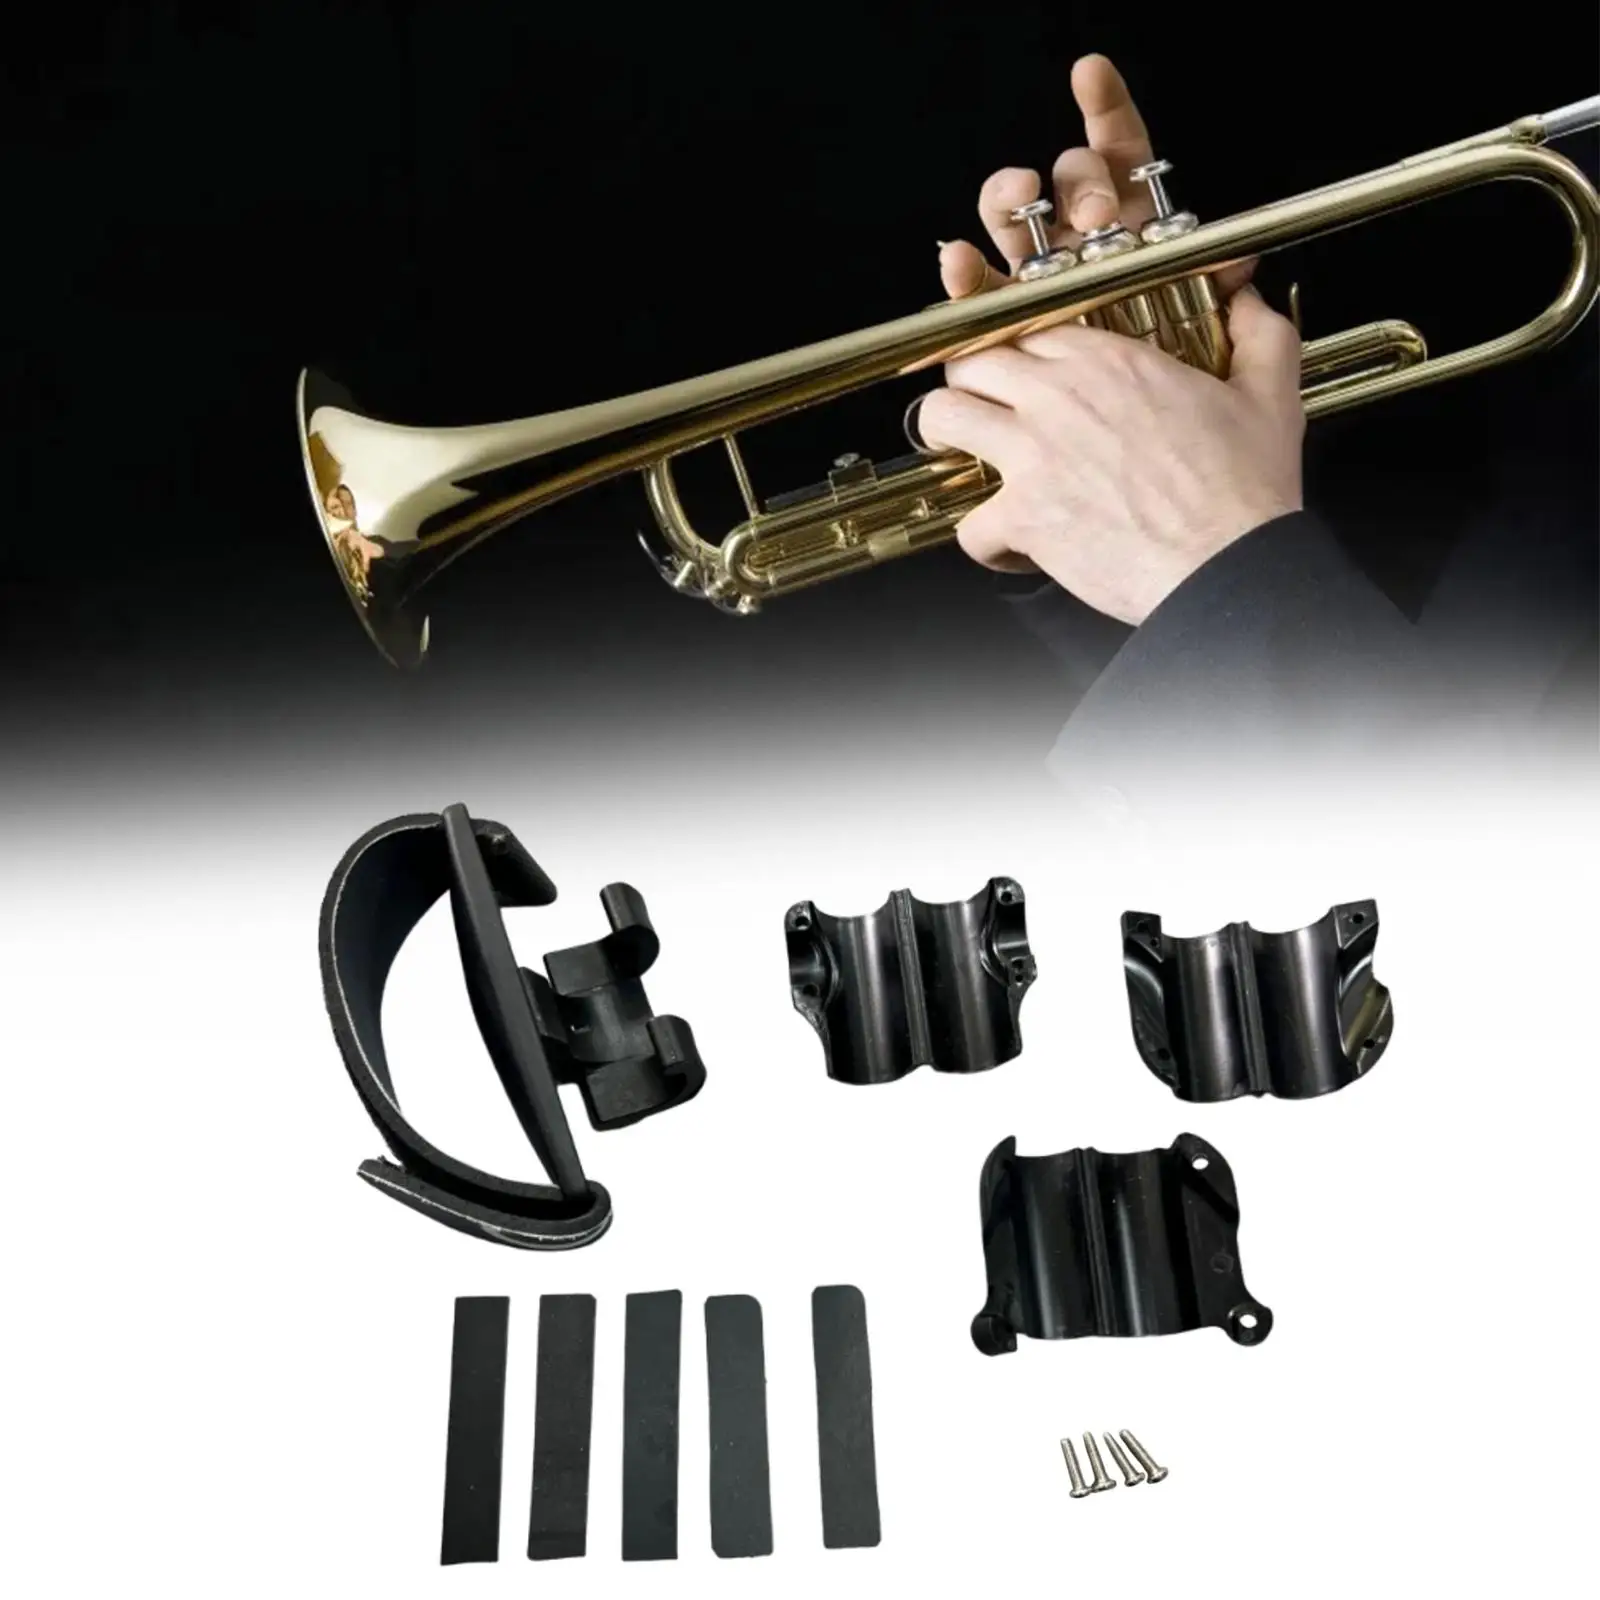 Trombone Grip Comfortable Attachments Can Balance The Instrument Guard Universal Musician Gifts Black Wraps Cleaning Care Parts